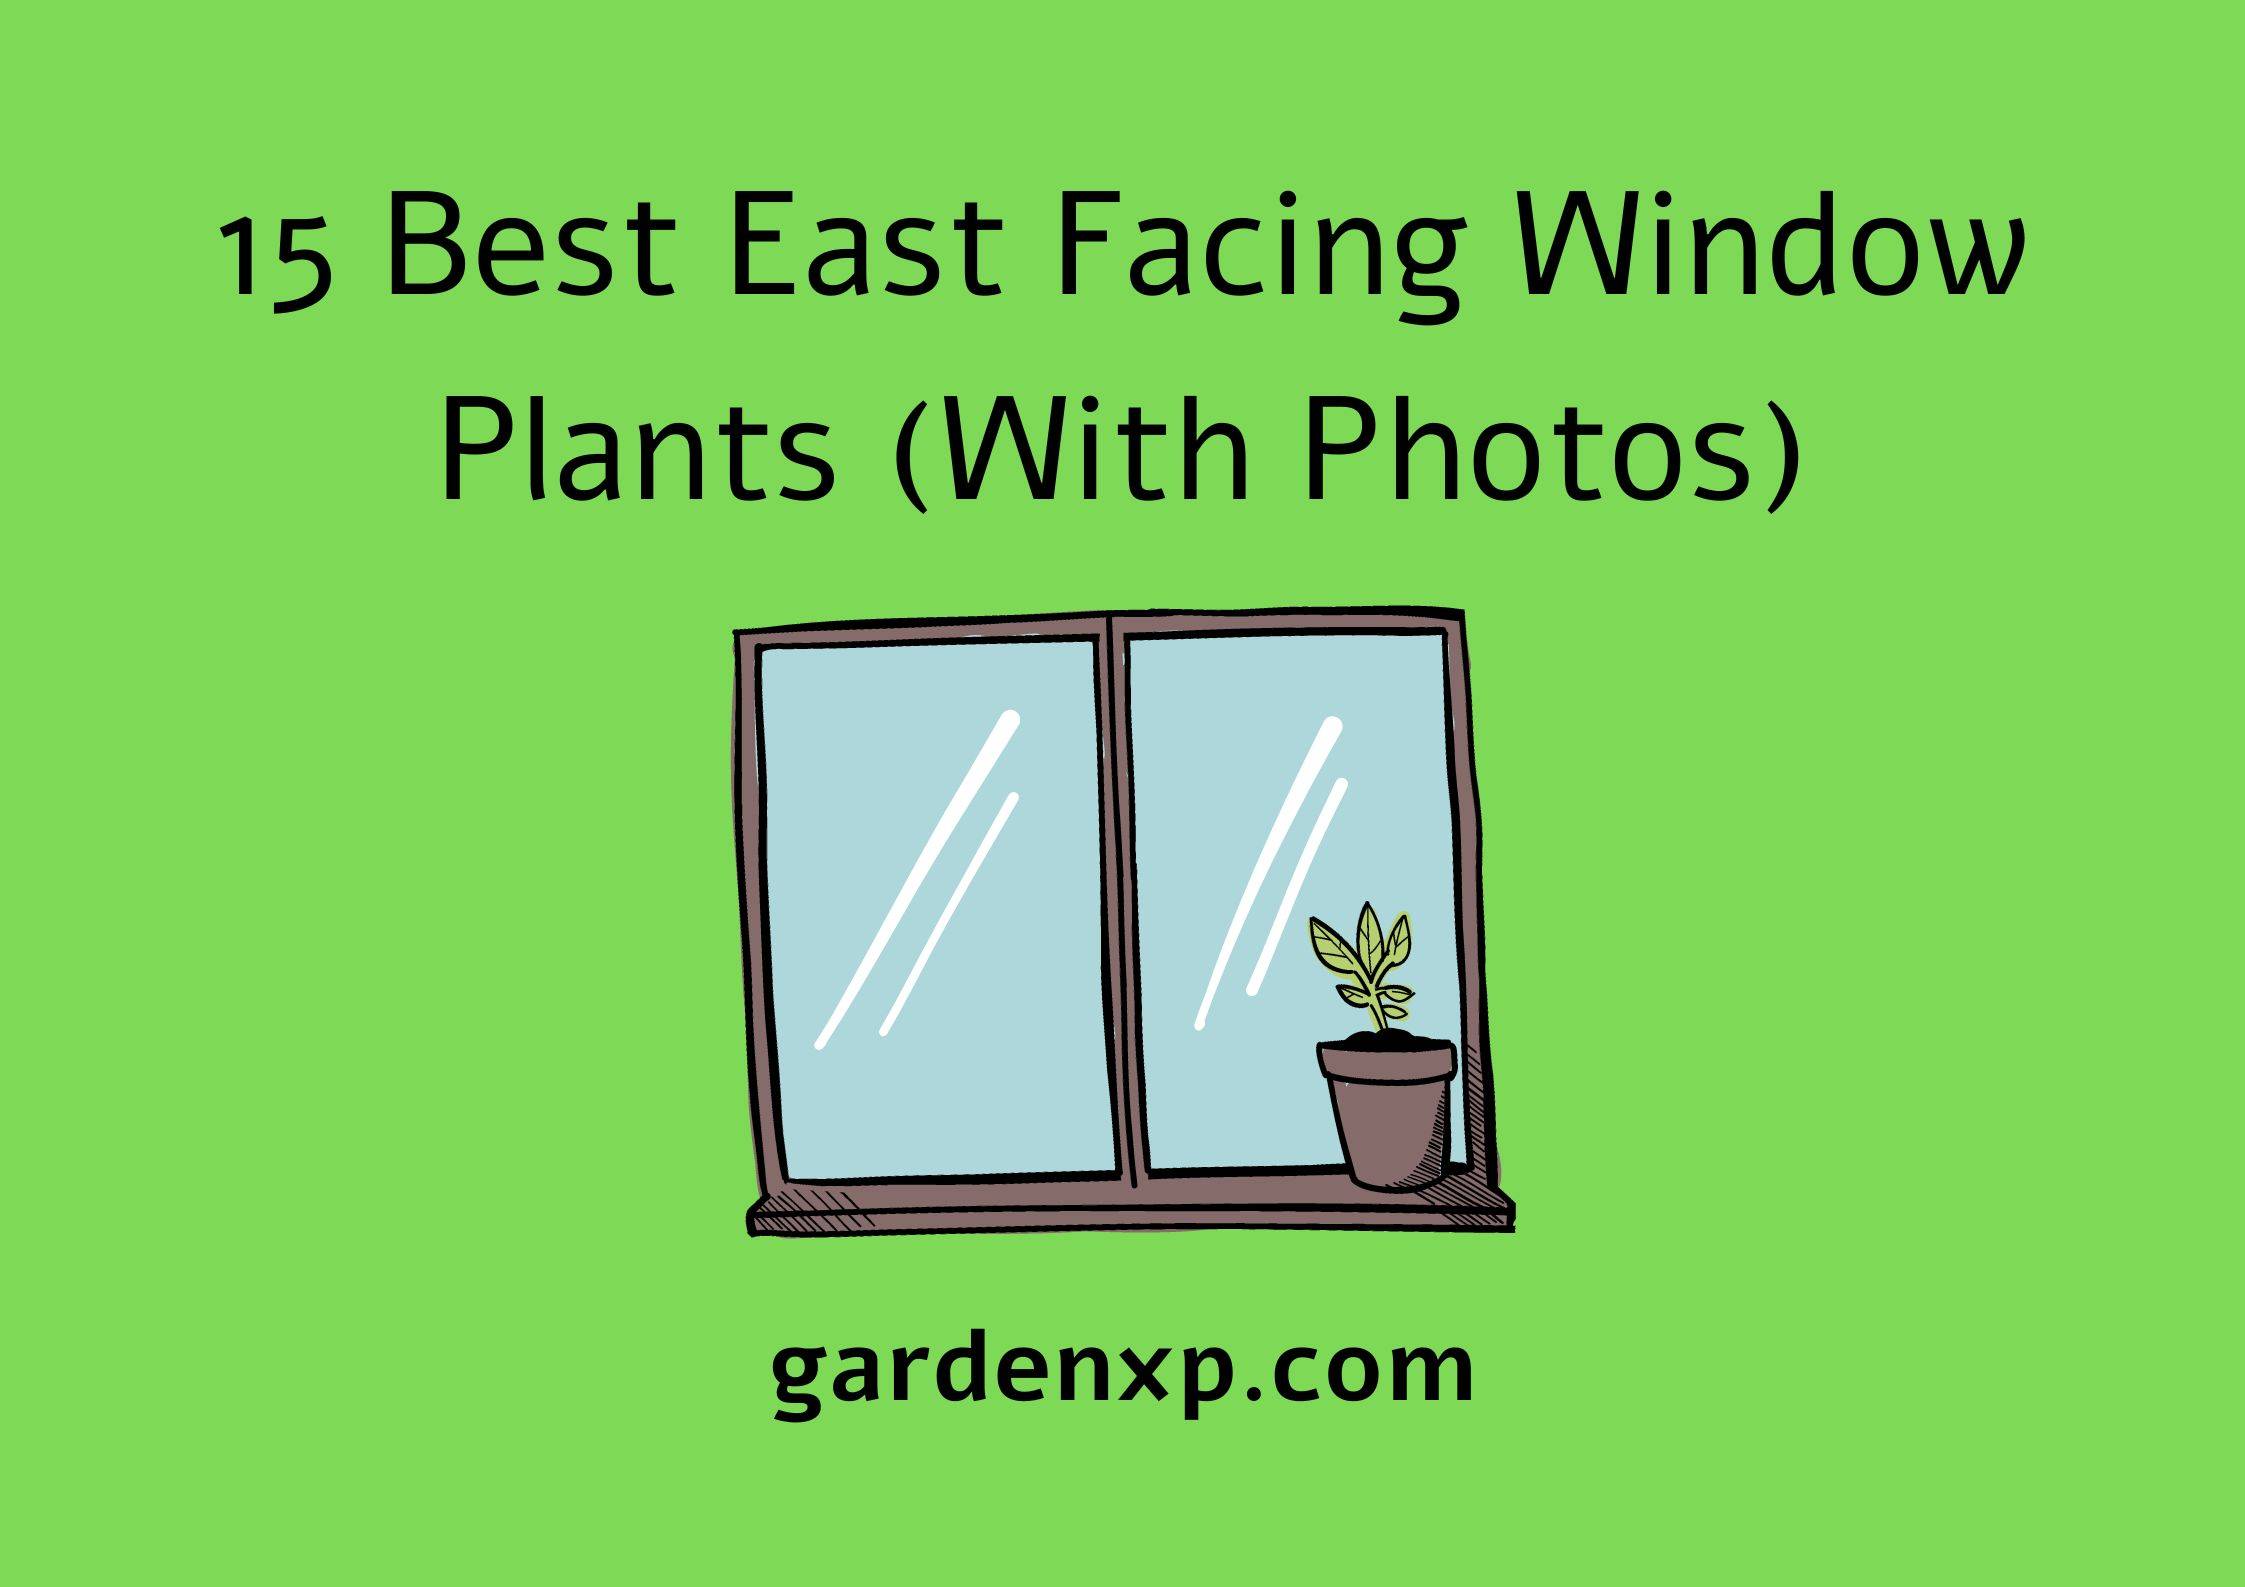 15 Best East Facing Window Plants (With Photos)